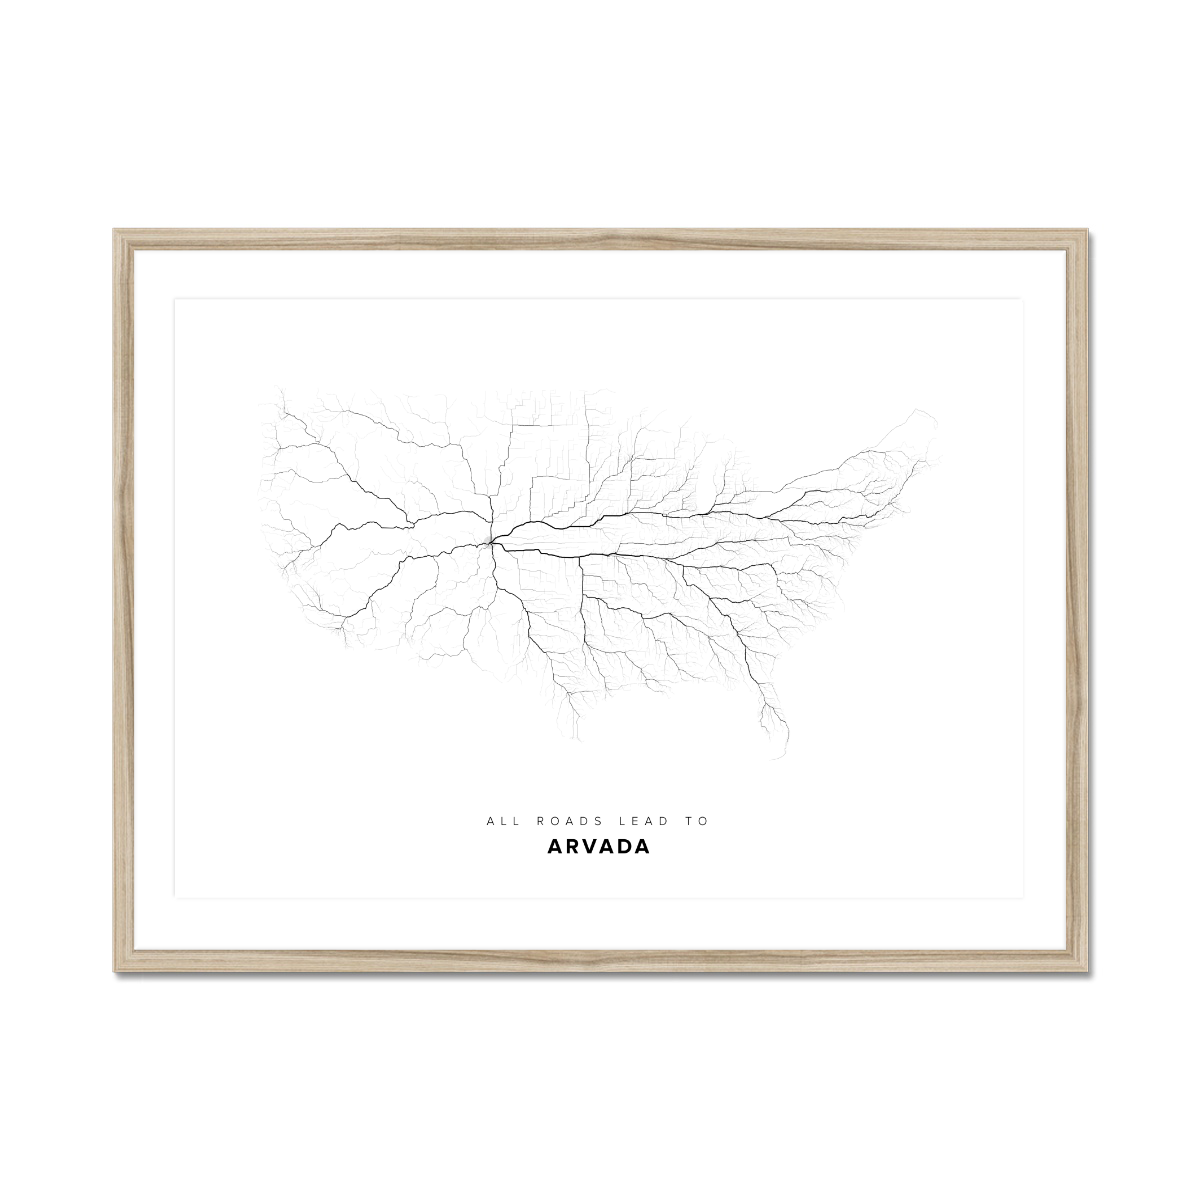 All roads lead to Arvada (United States of America) Fine Art Map Print